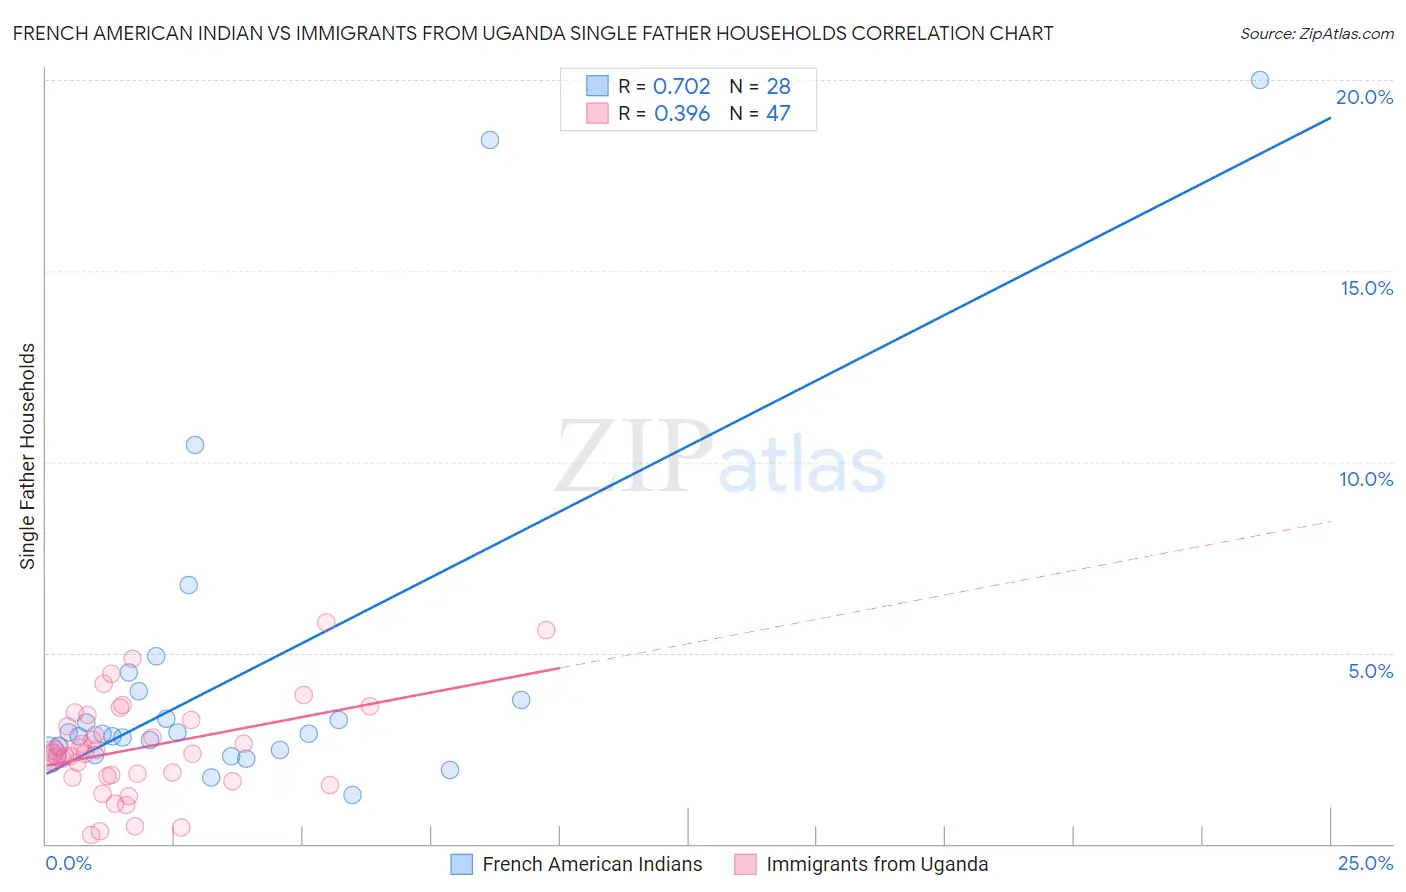 French American Indian vs Immigrants from Uganda Single Father Households